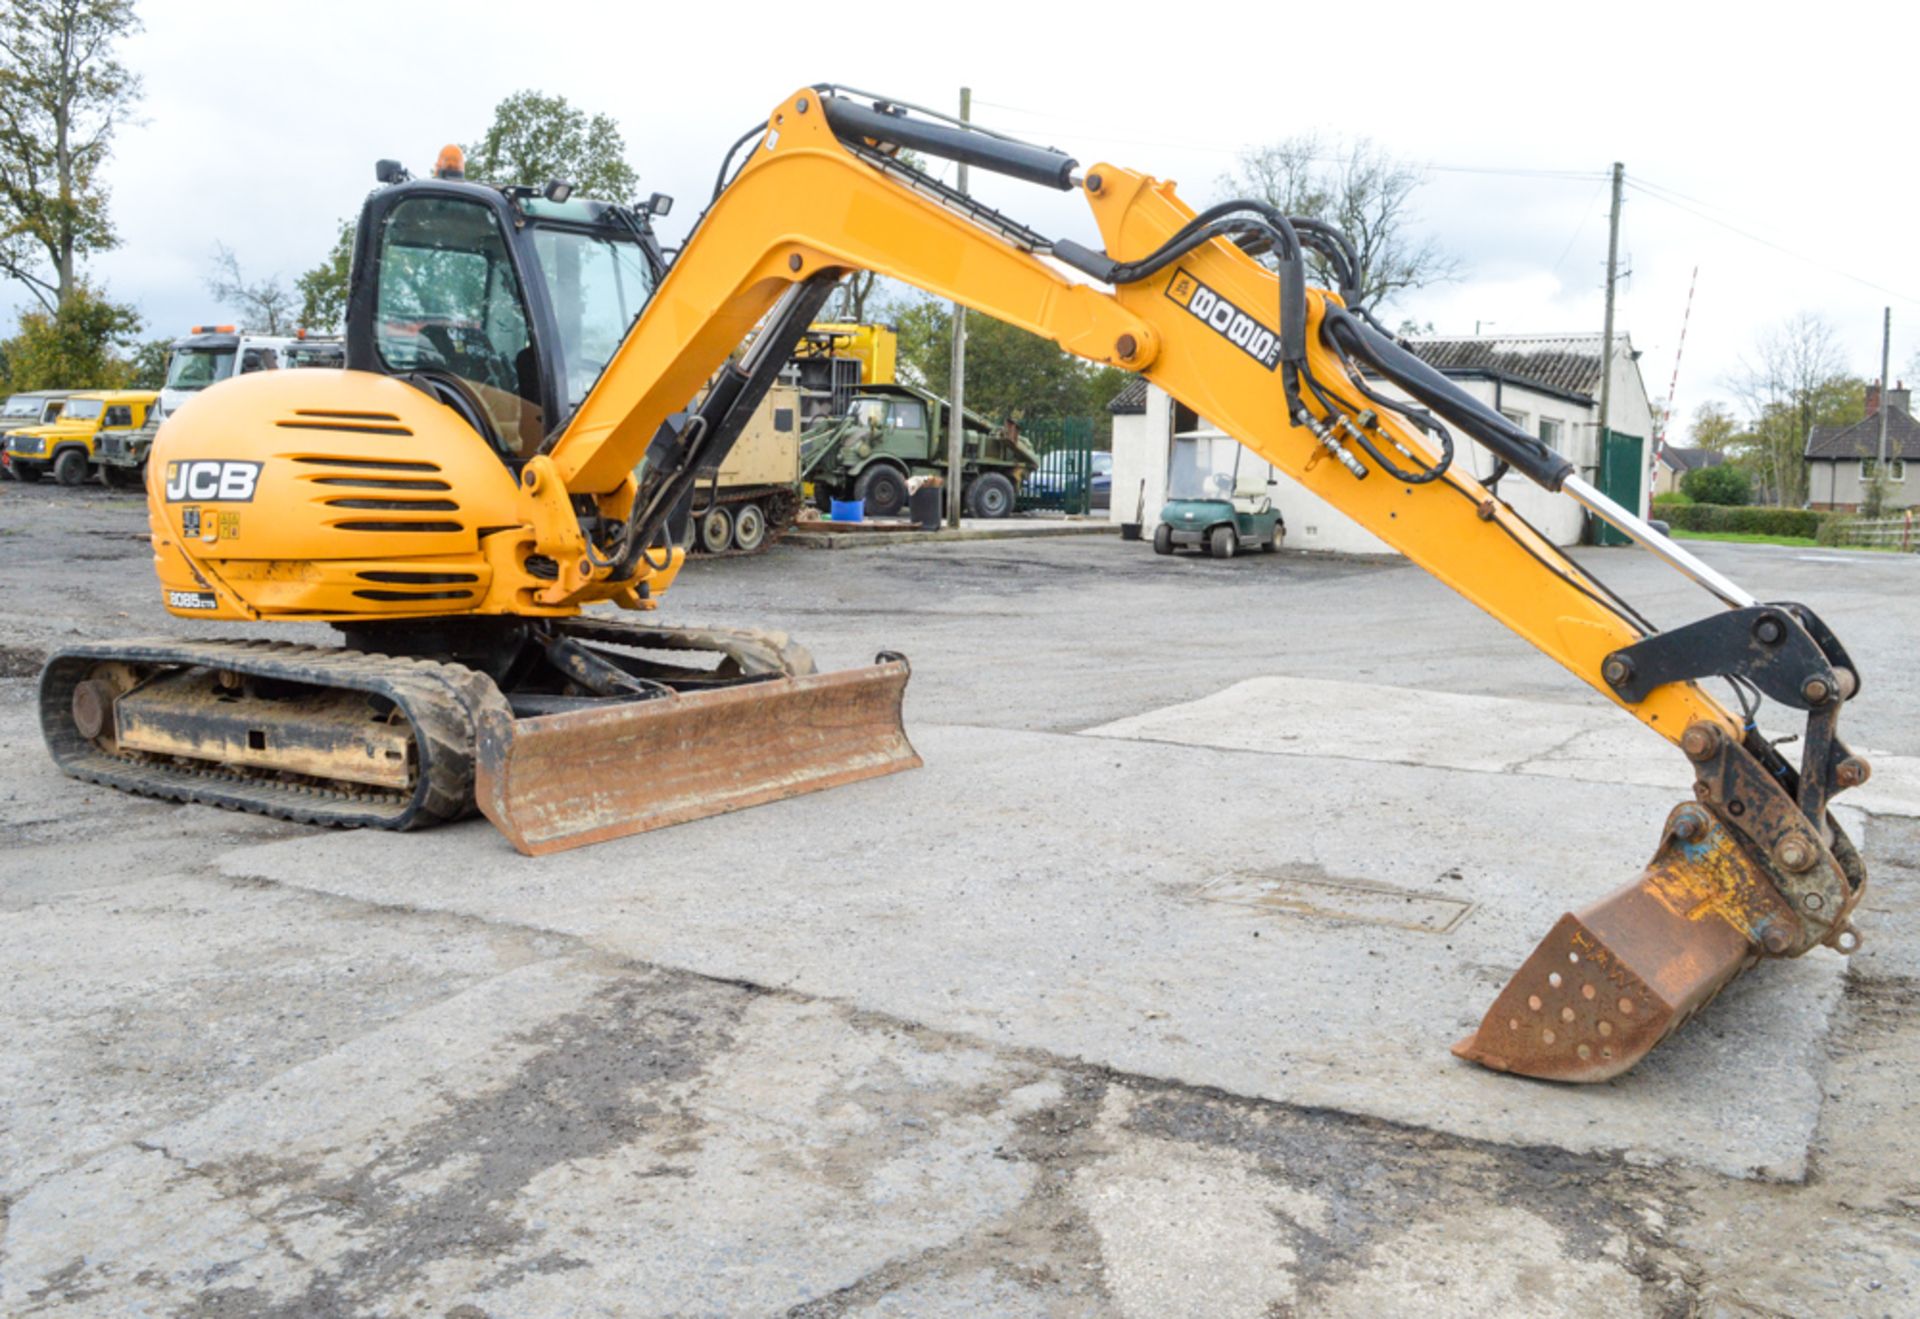 JCB 8085 ZTS Eco 8.5 tonne rubber tracked excavator Year: 2012 S/N: 1072638 Recorded Hours: 4385 - Image 4 of 12